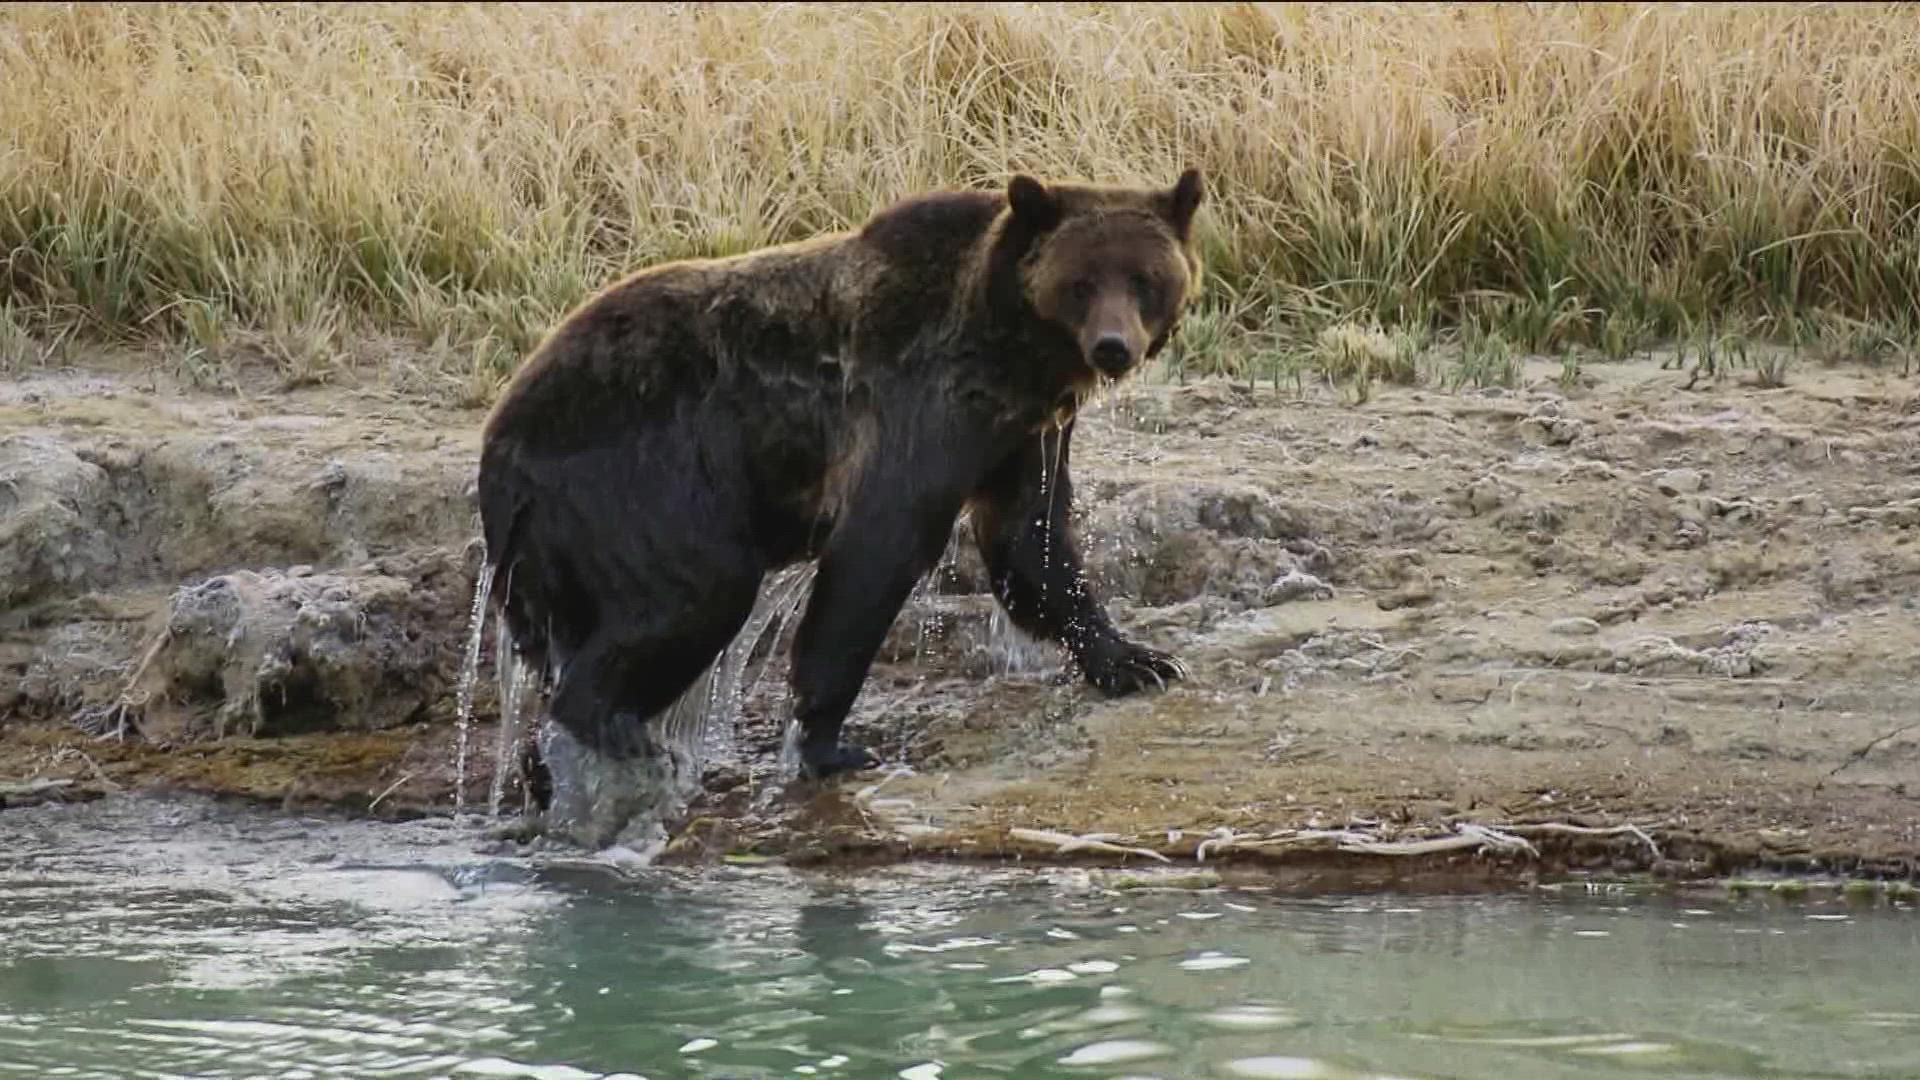 The sow grizzly and the cubs first became a public safety concern this fall, when they began frequenting the residential areas near Yellowstone National Park.